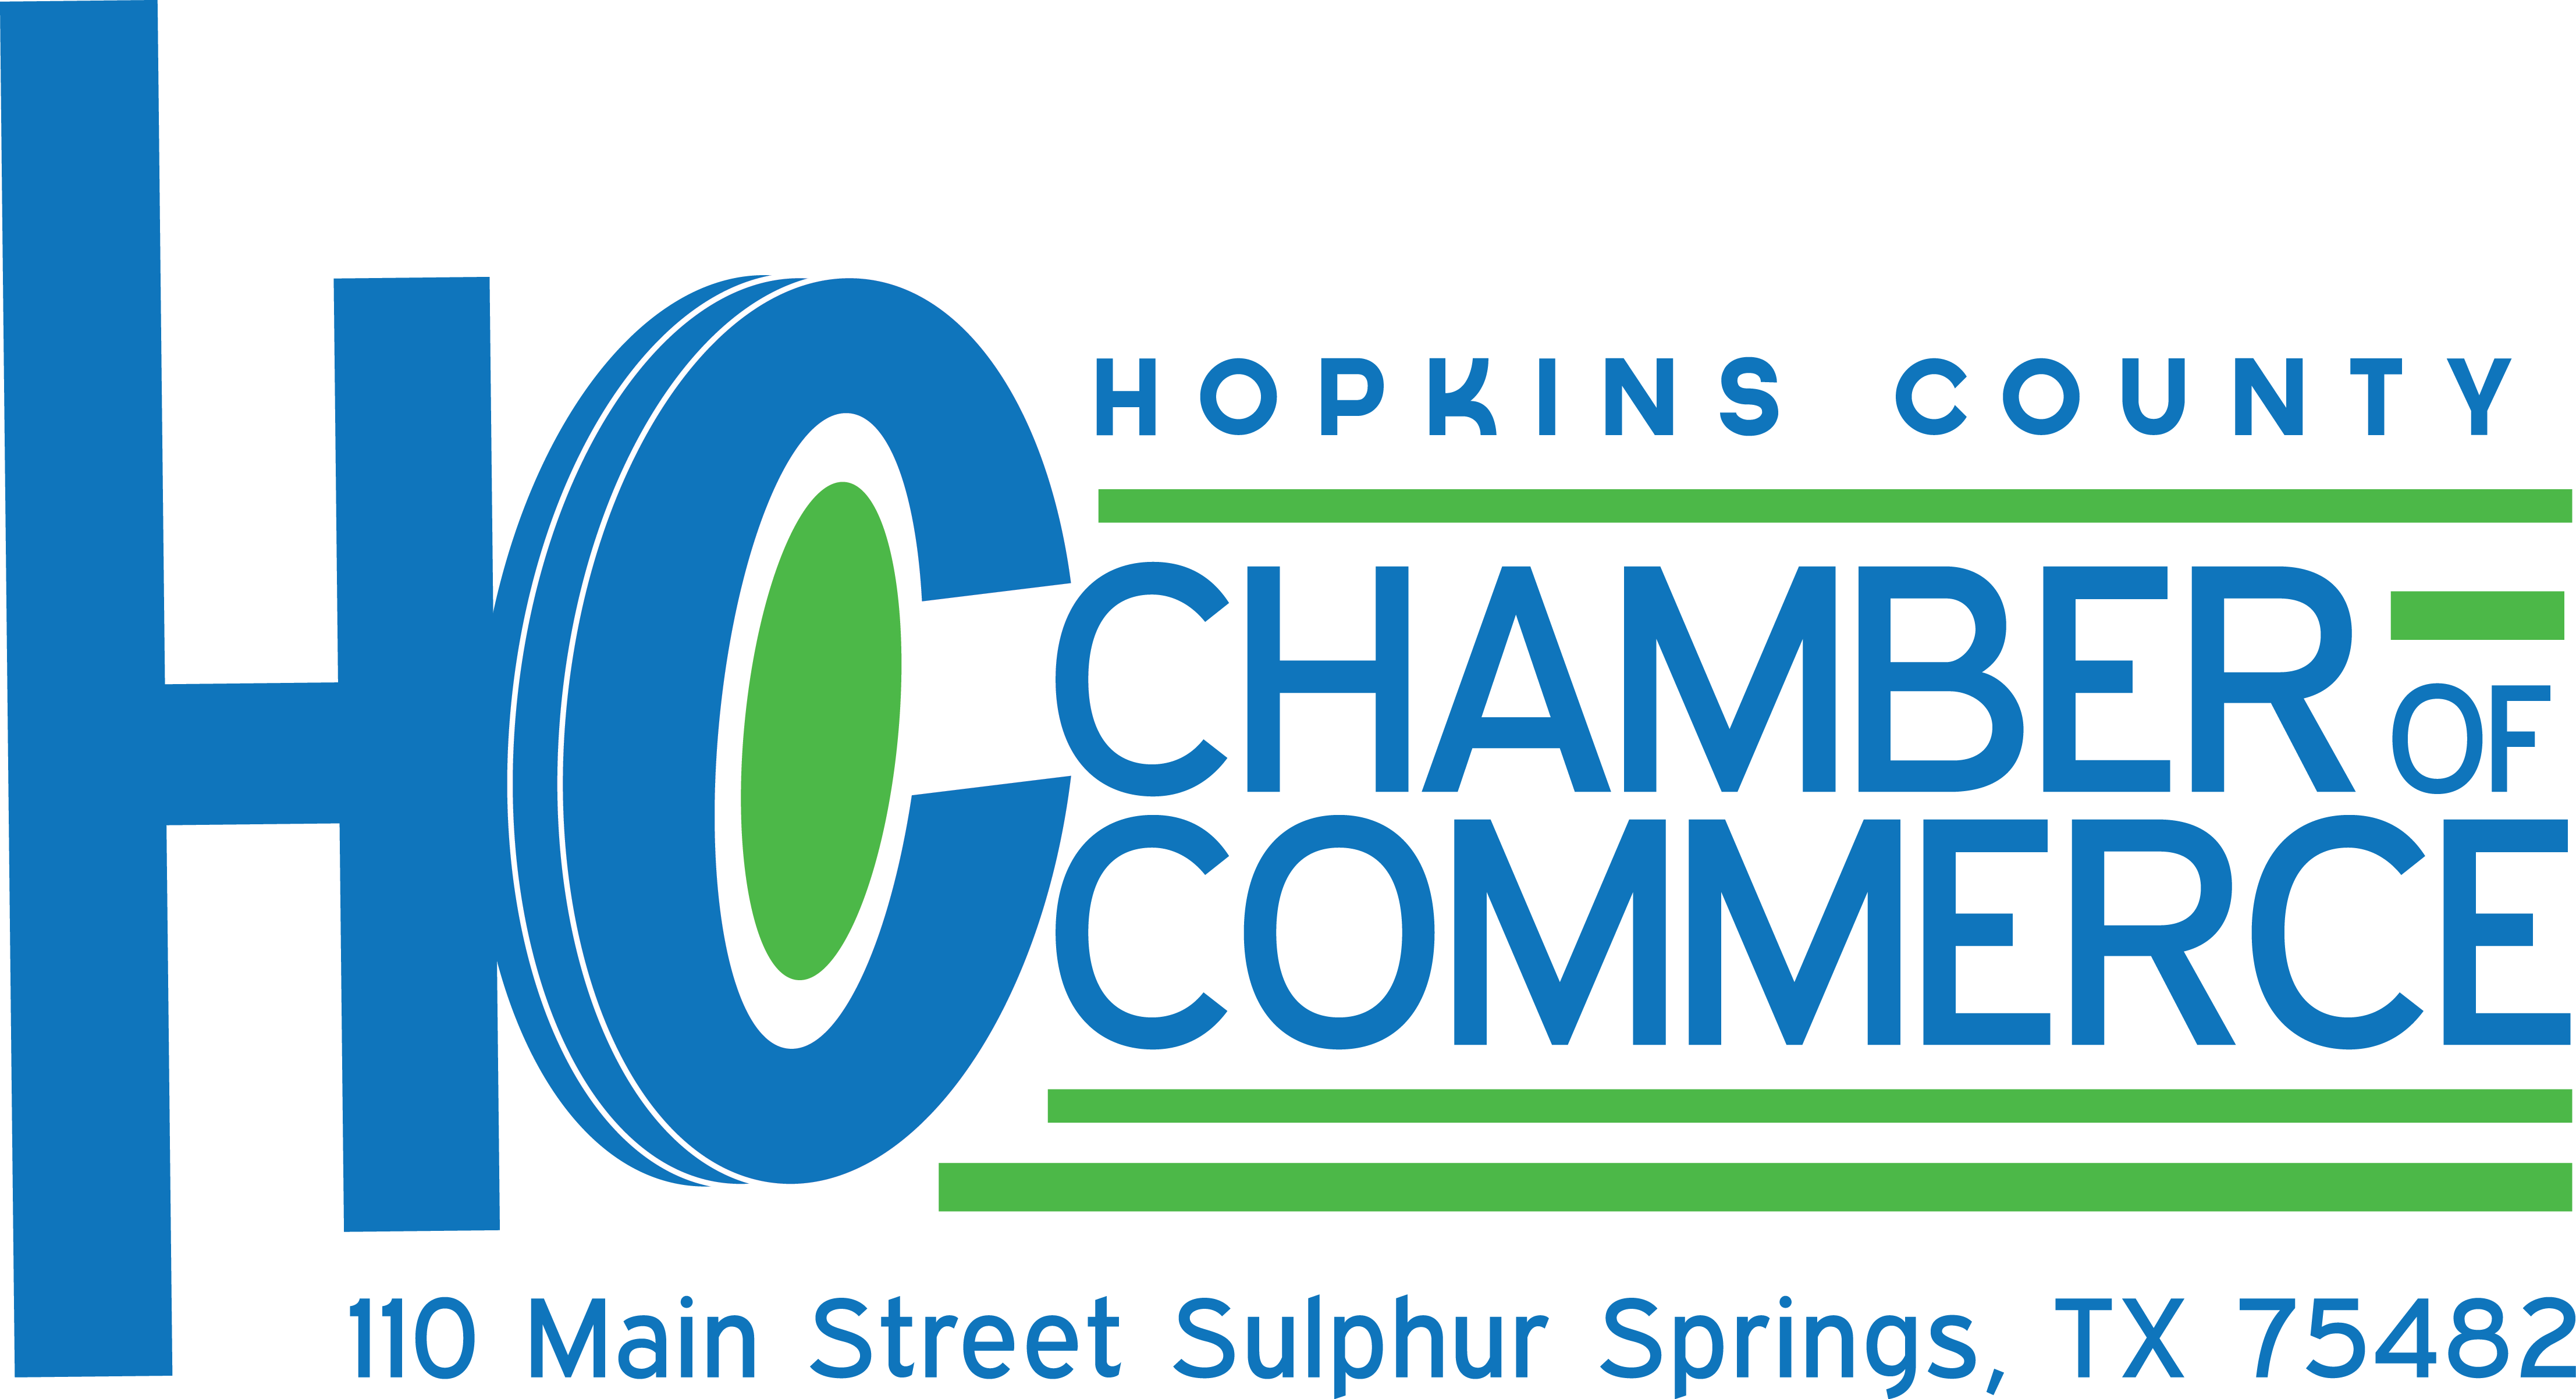 Hopkins County Chamber of Commerce President Lezley Brown Announces Plan to Resign. Applications for the Position Being Accepted.